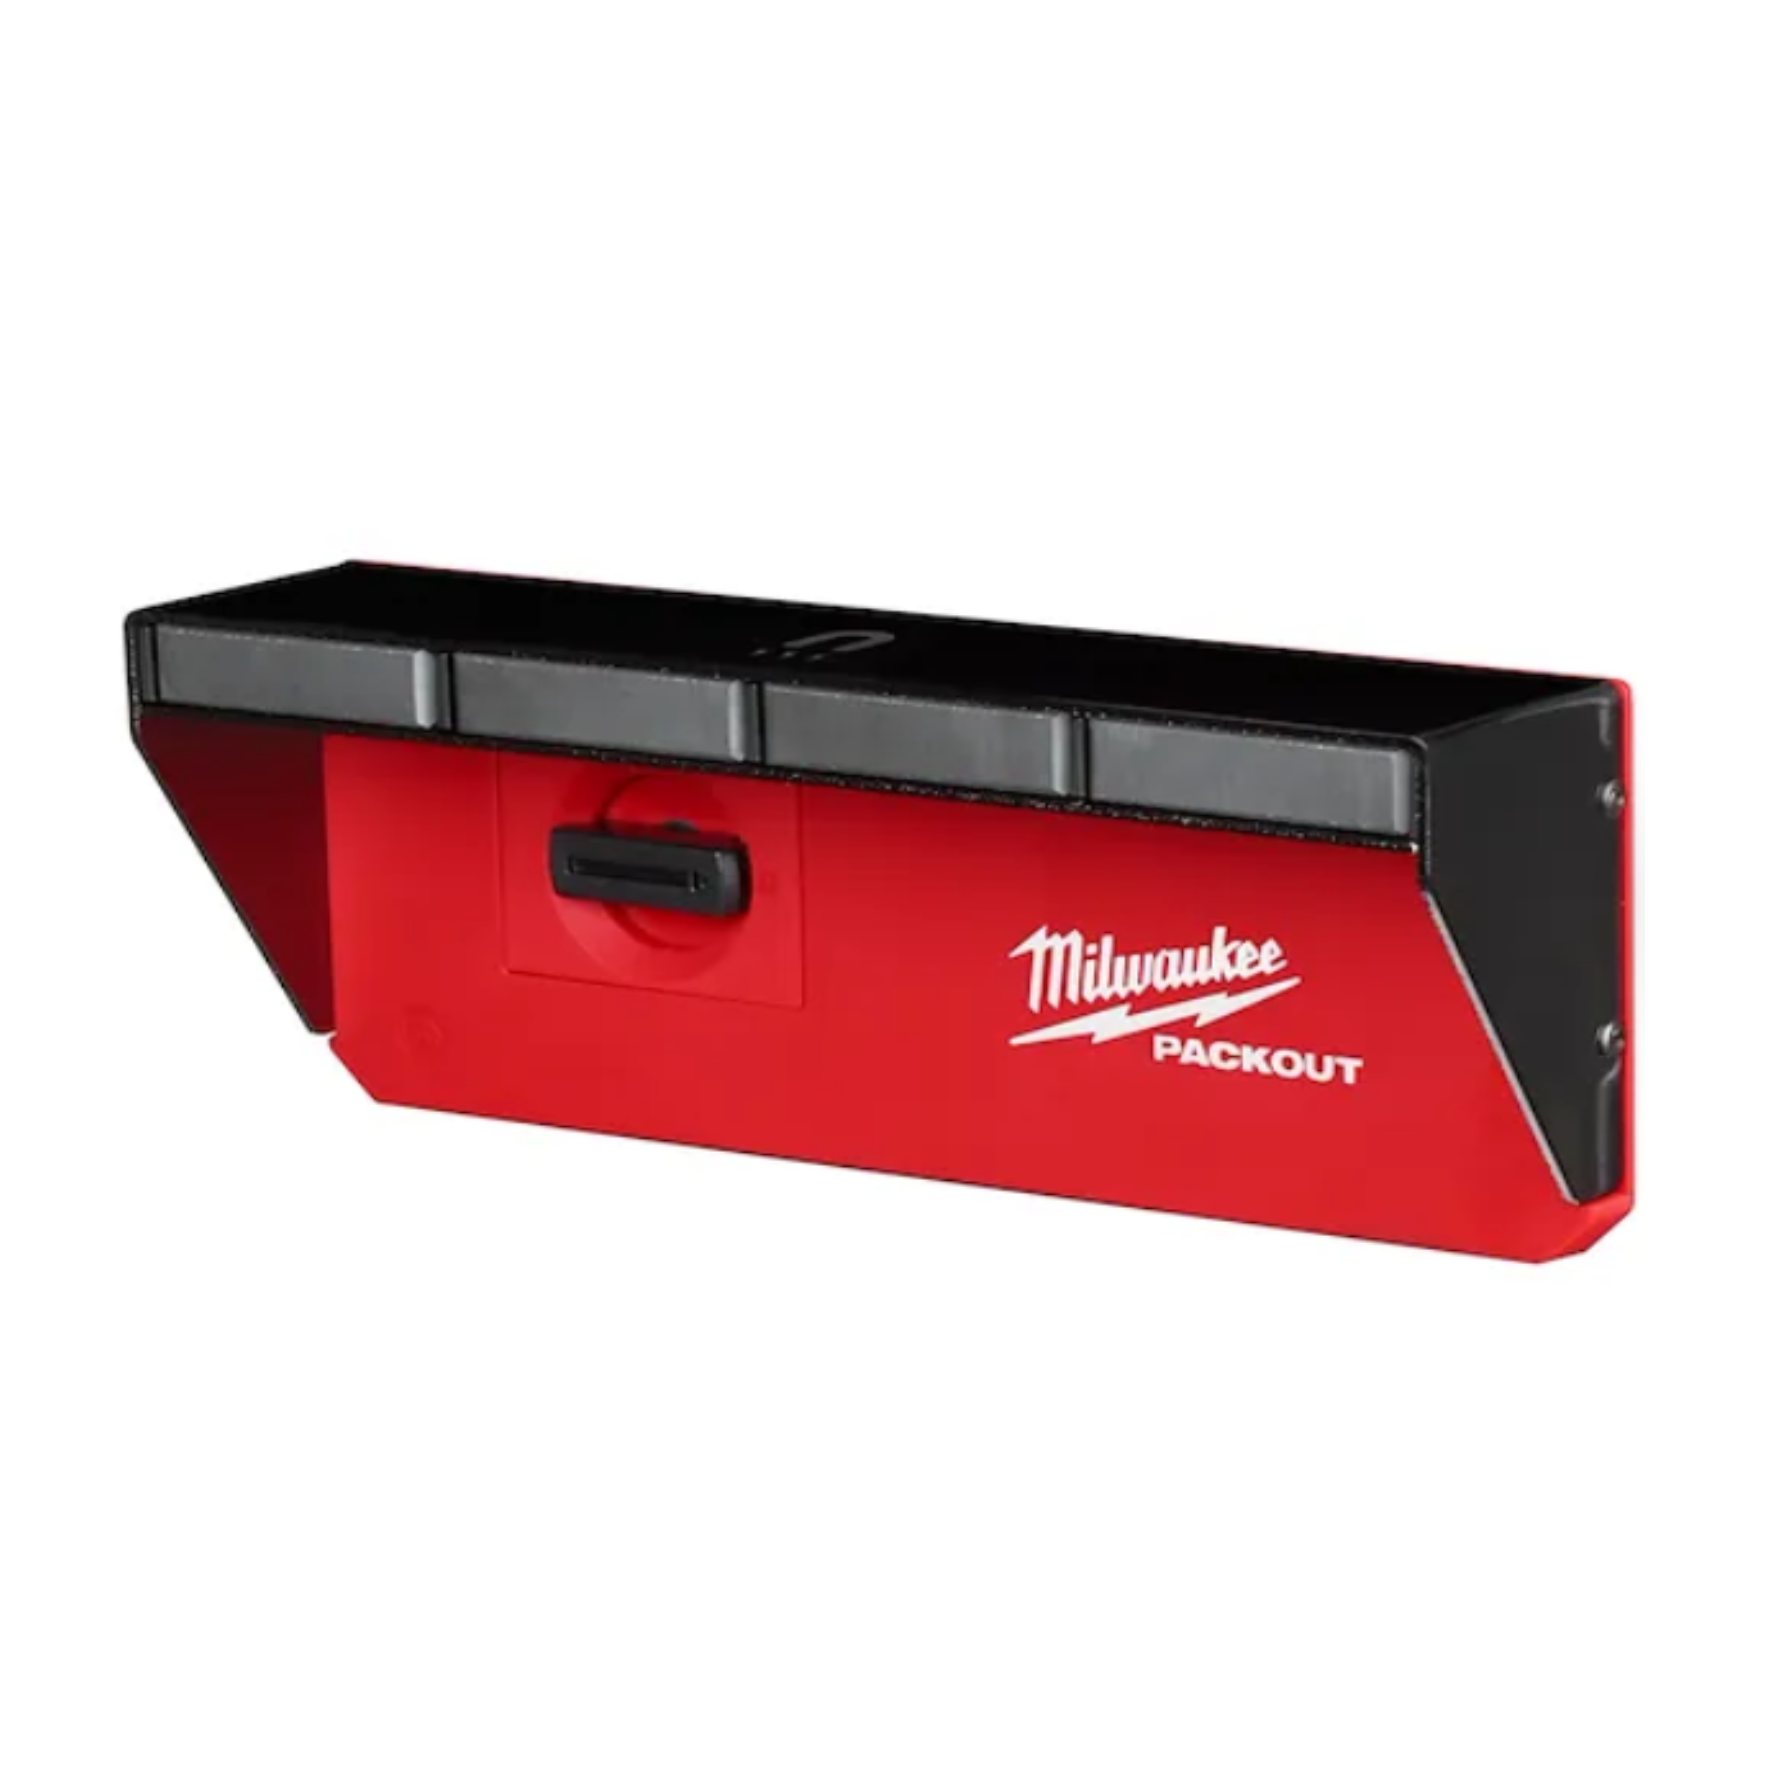 MILWAUKEE PACKOUT Magnetic Rack 48-22-8346